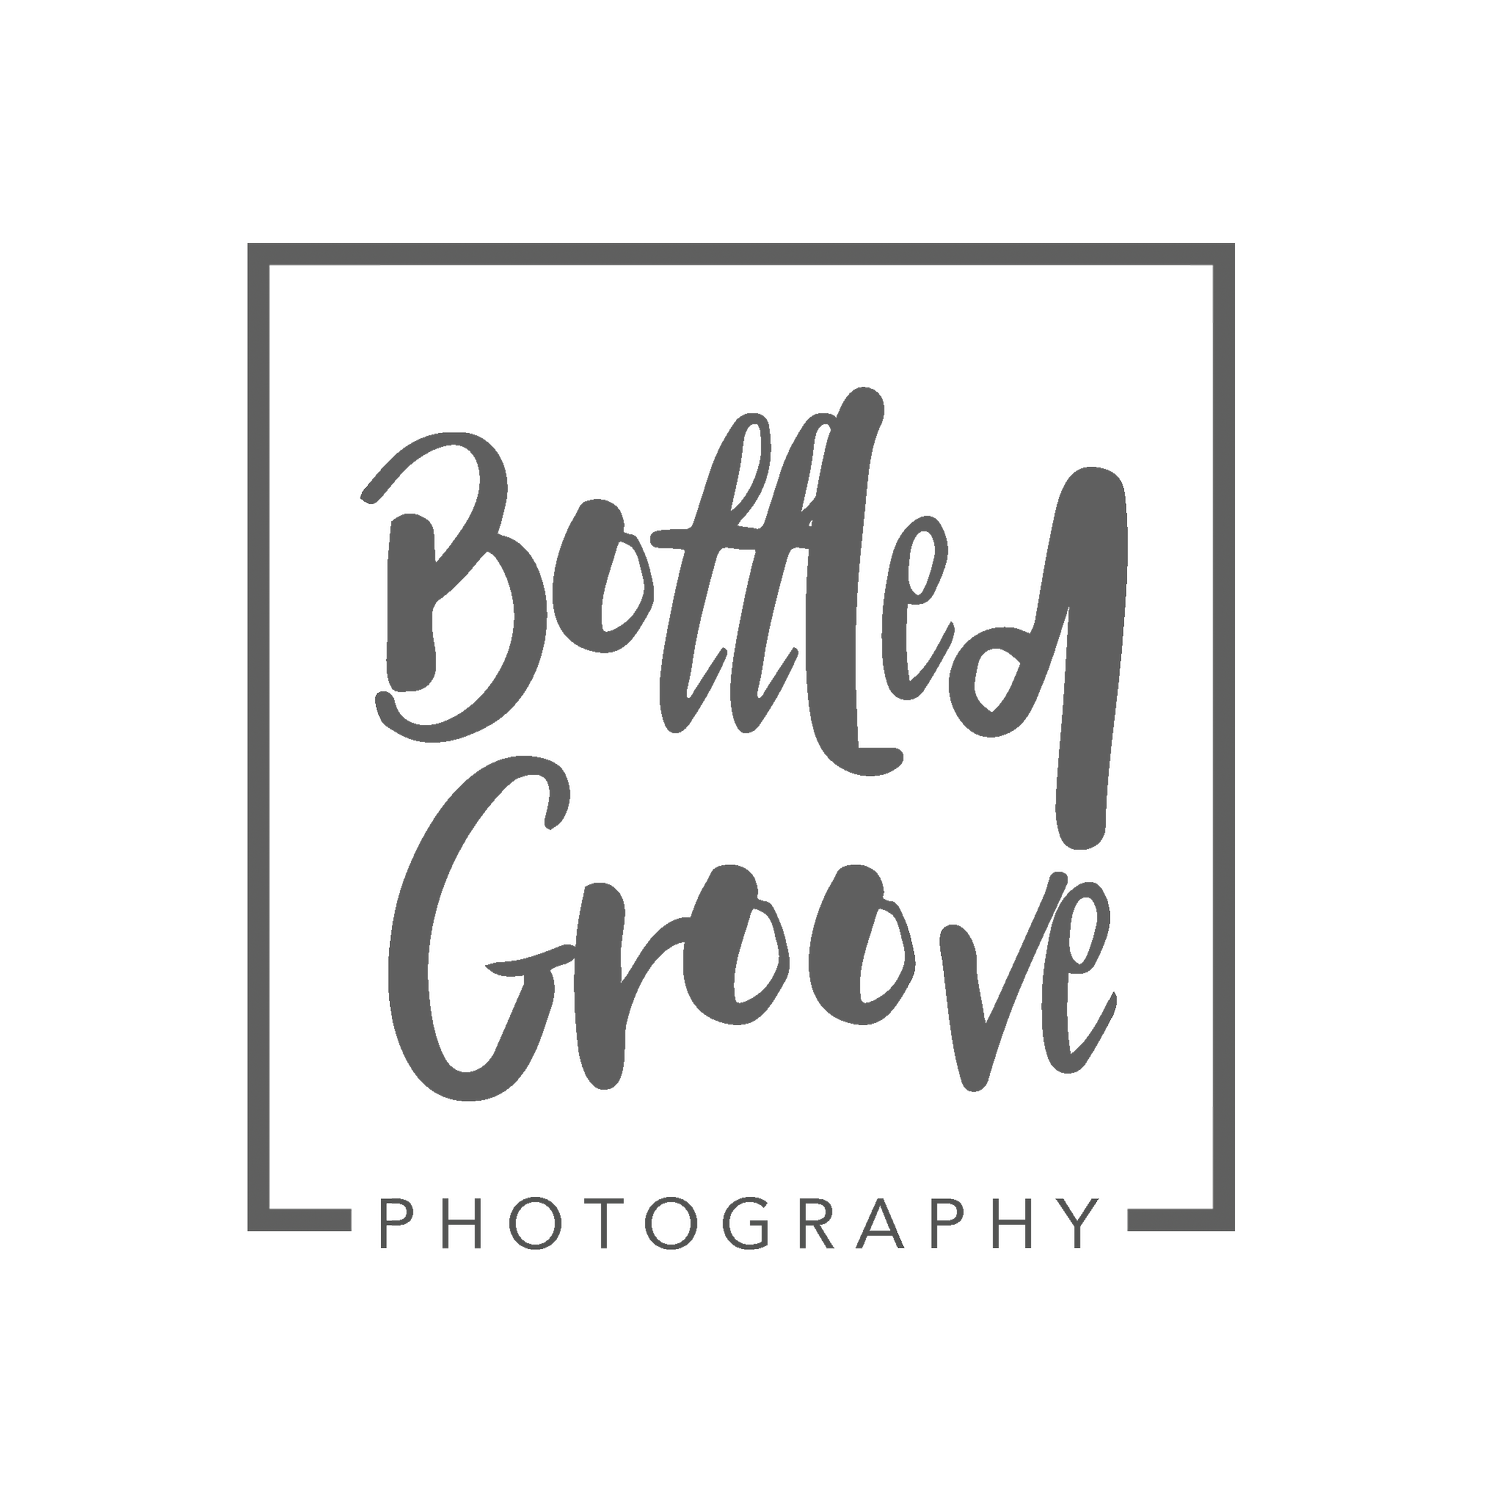 Bottled Groove Photography